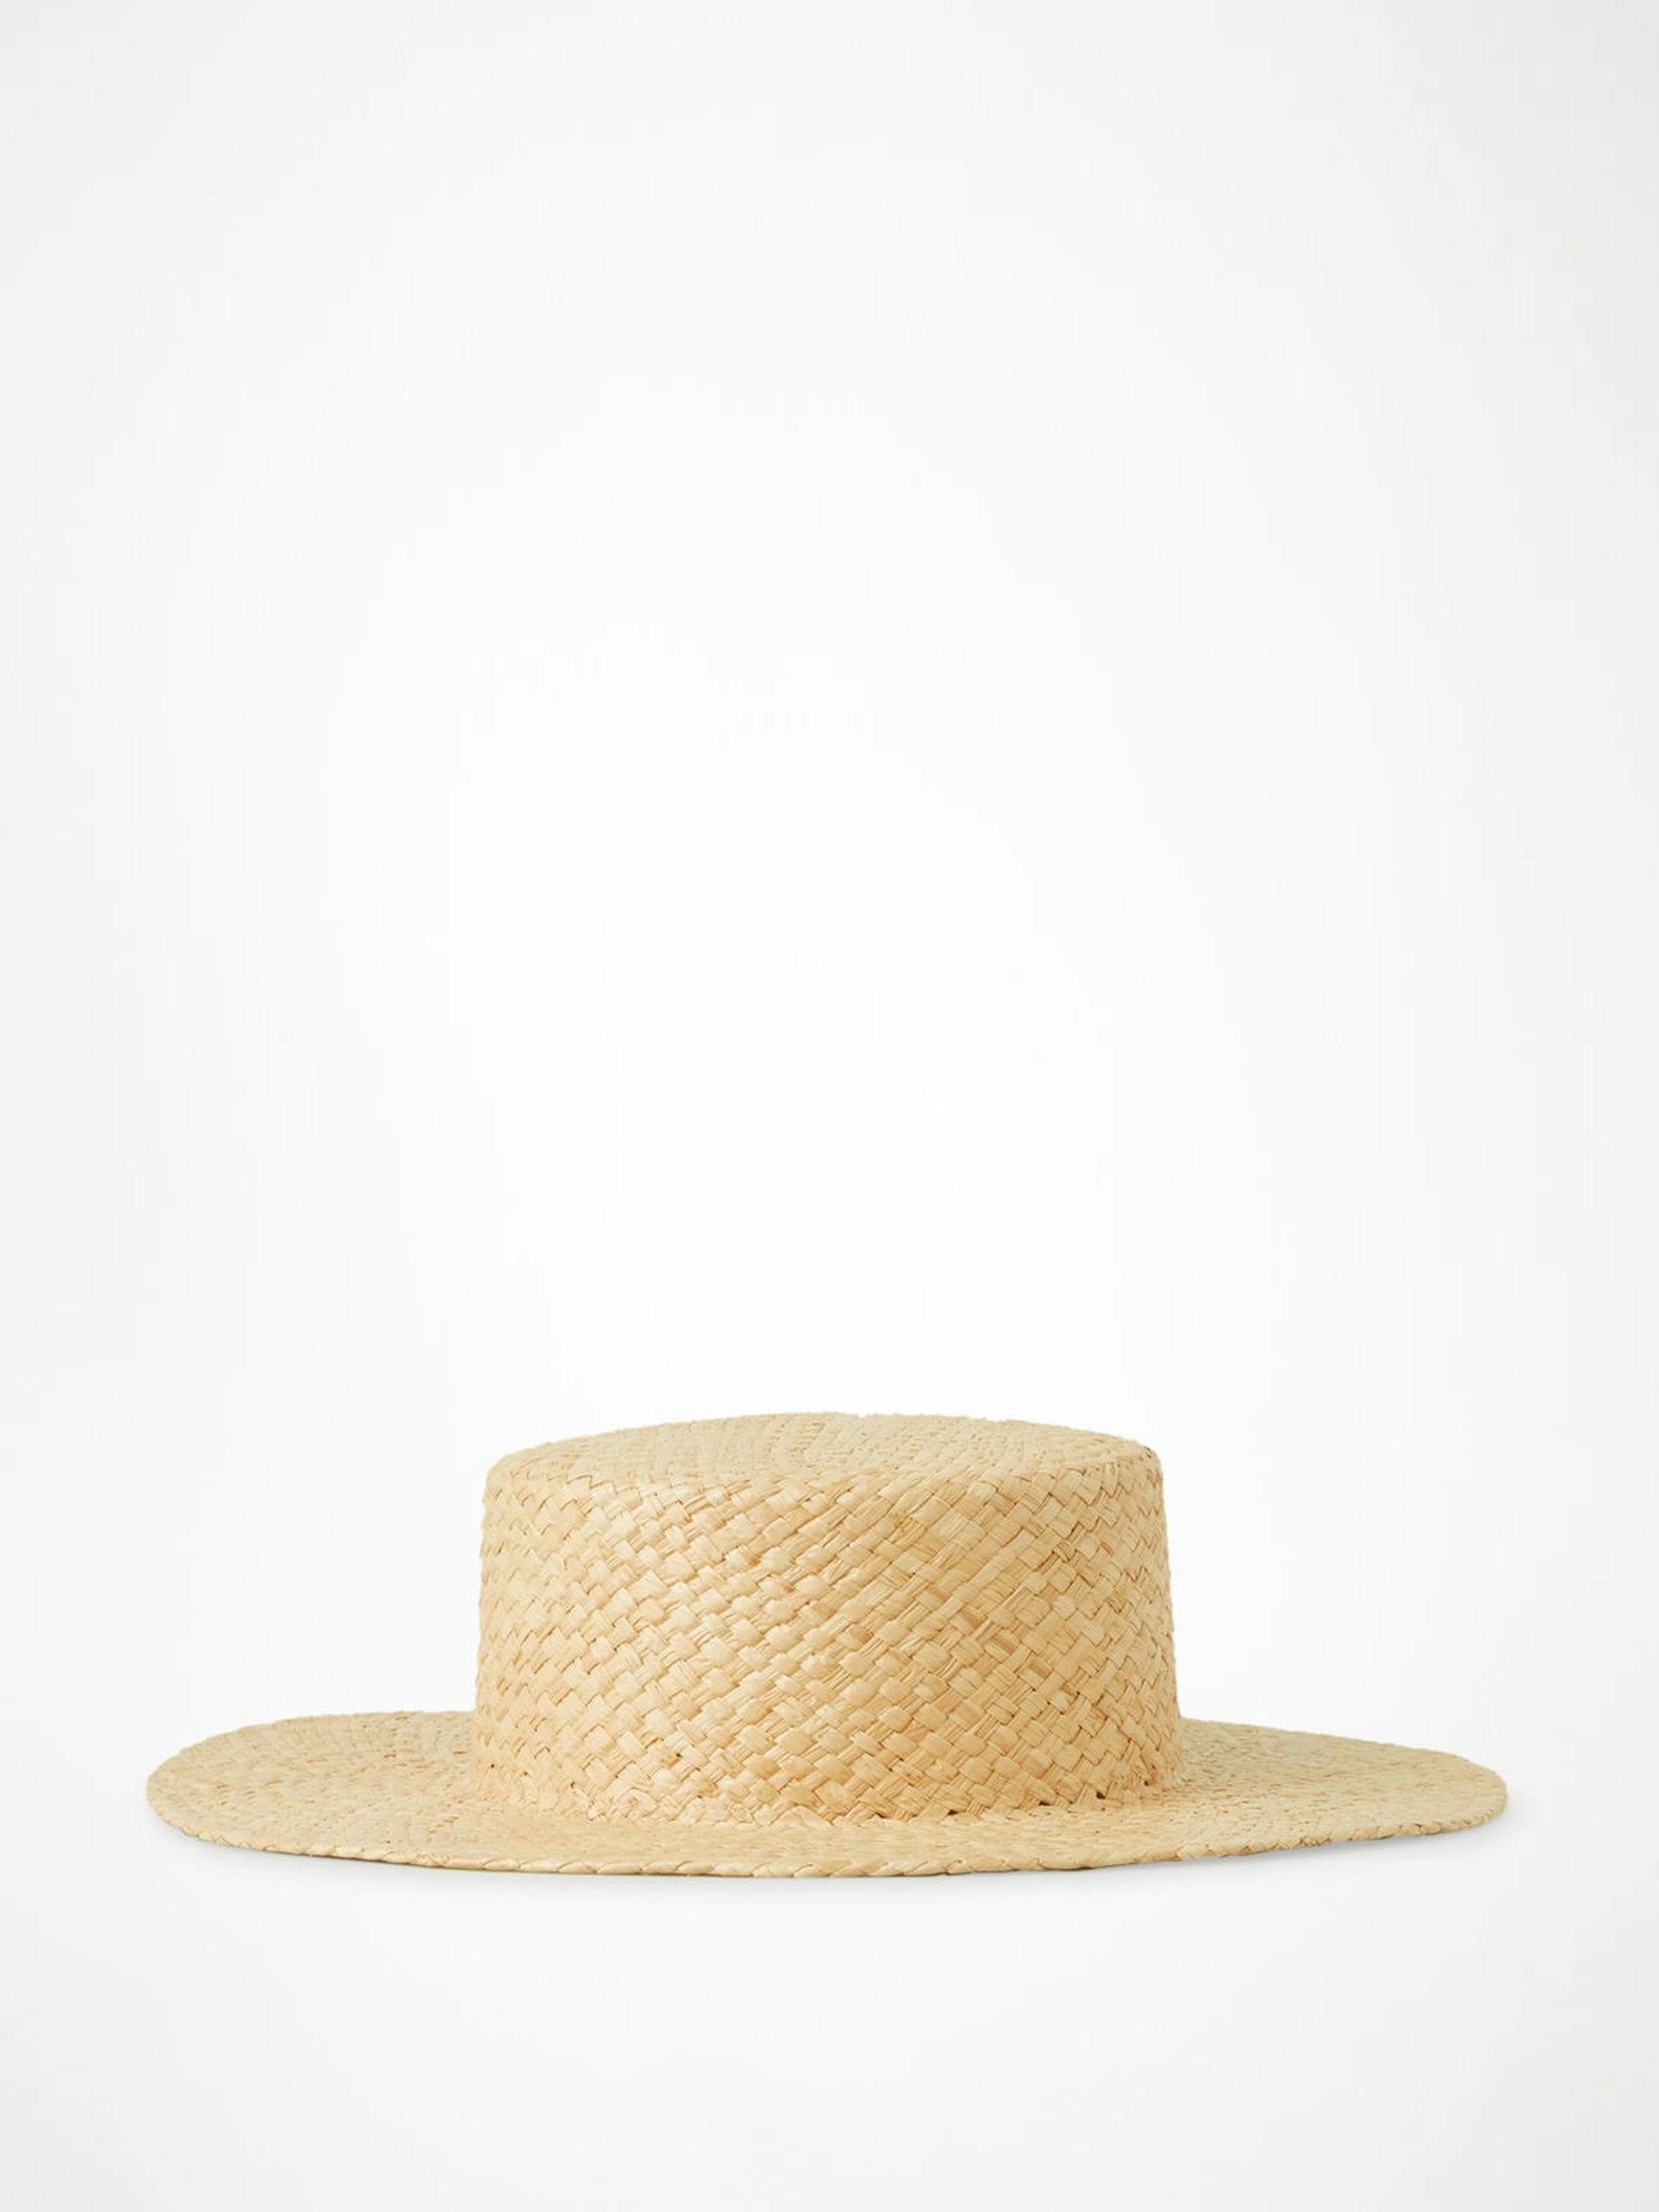 Oversized straw boater hat